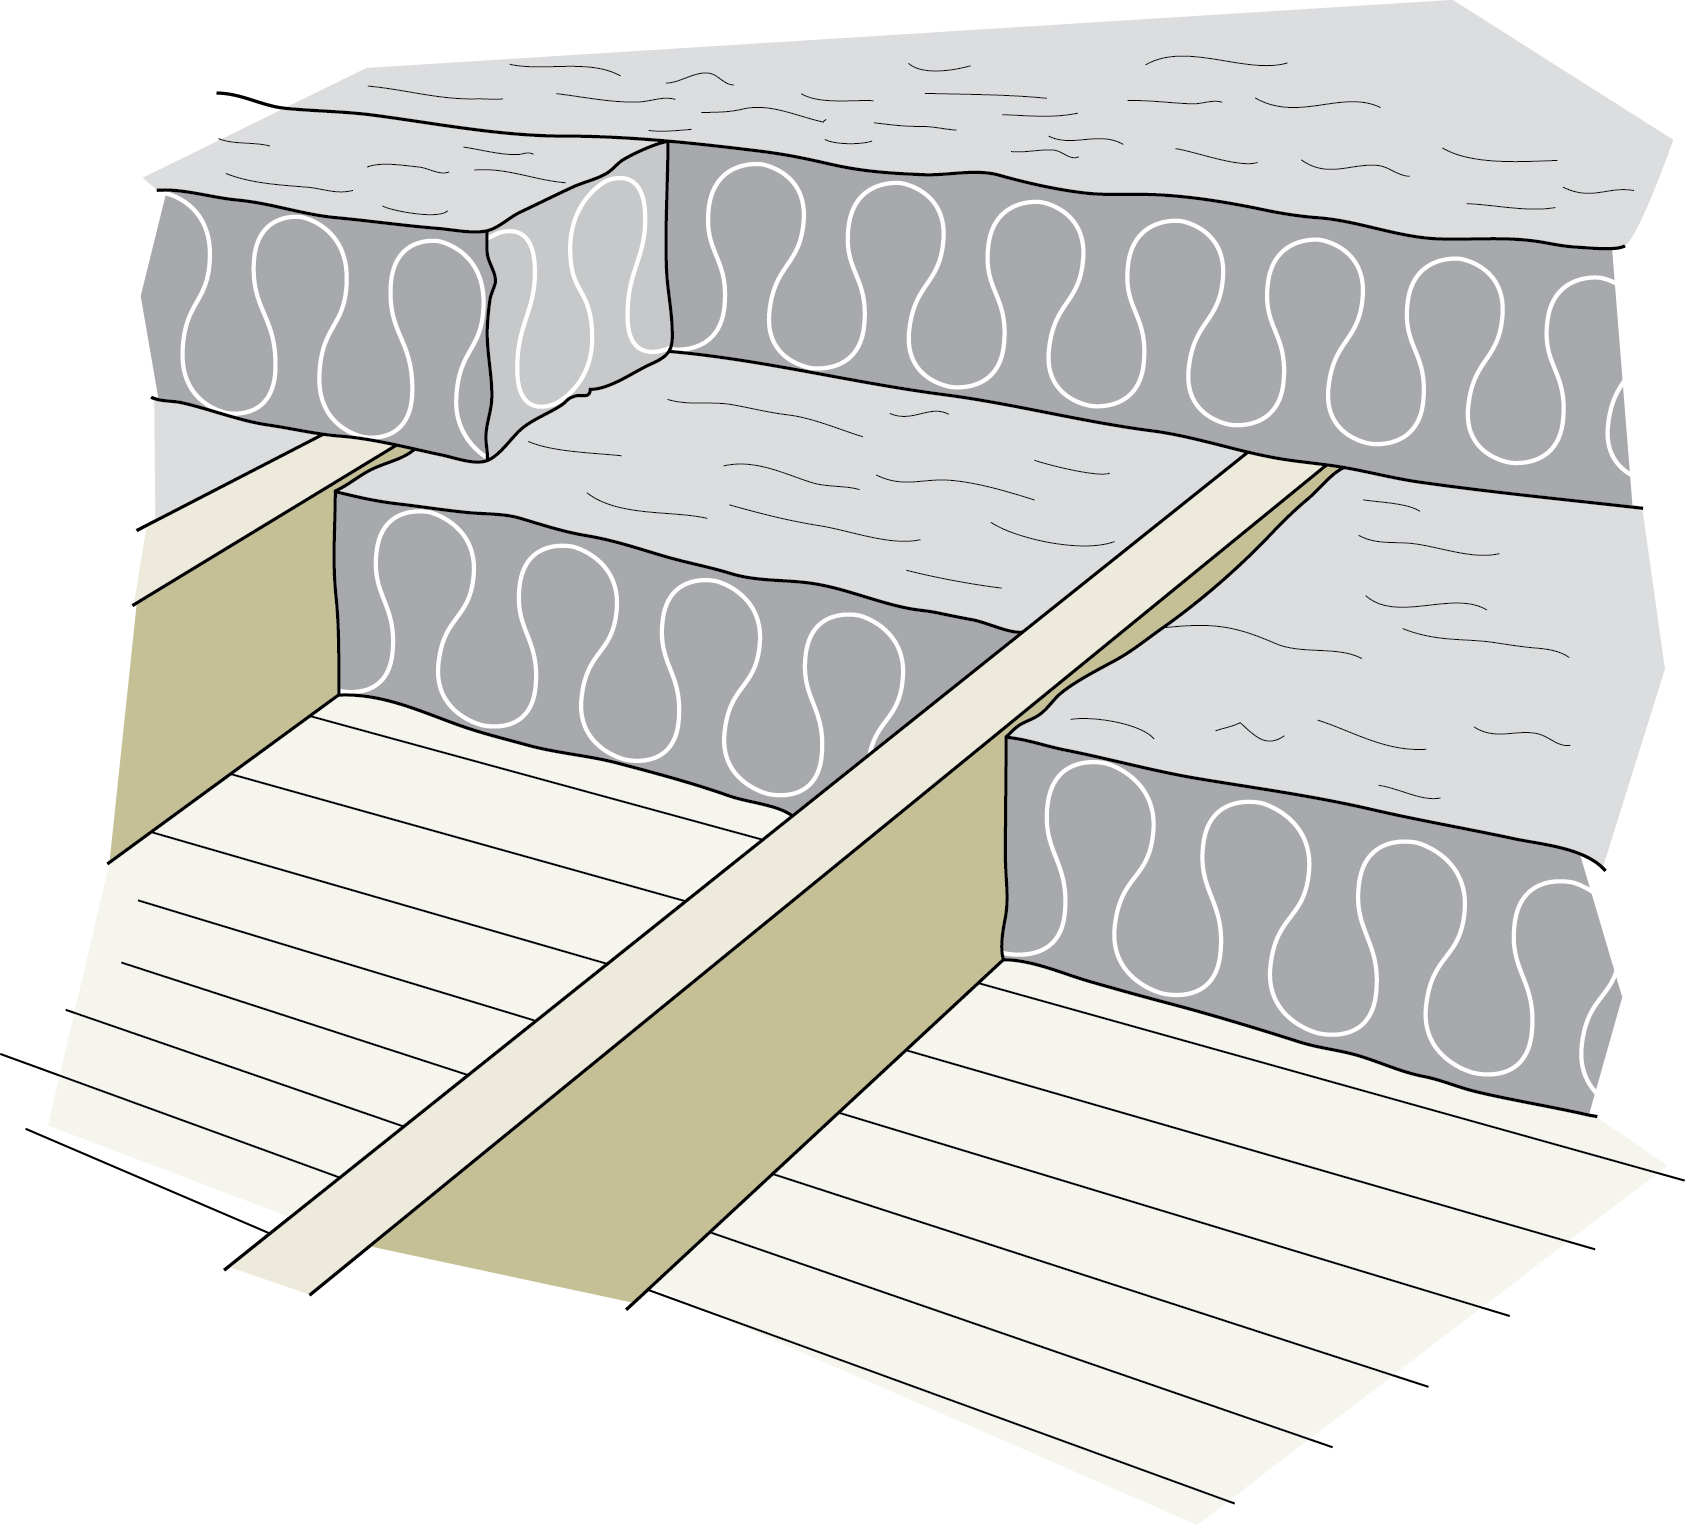 Figure 5-13 The top layer of insulation runs perpendicular to the bottom layer